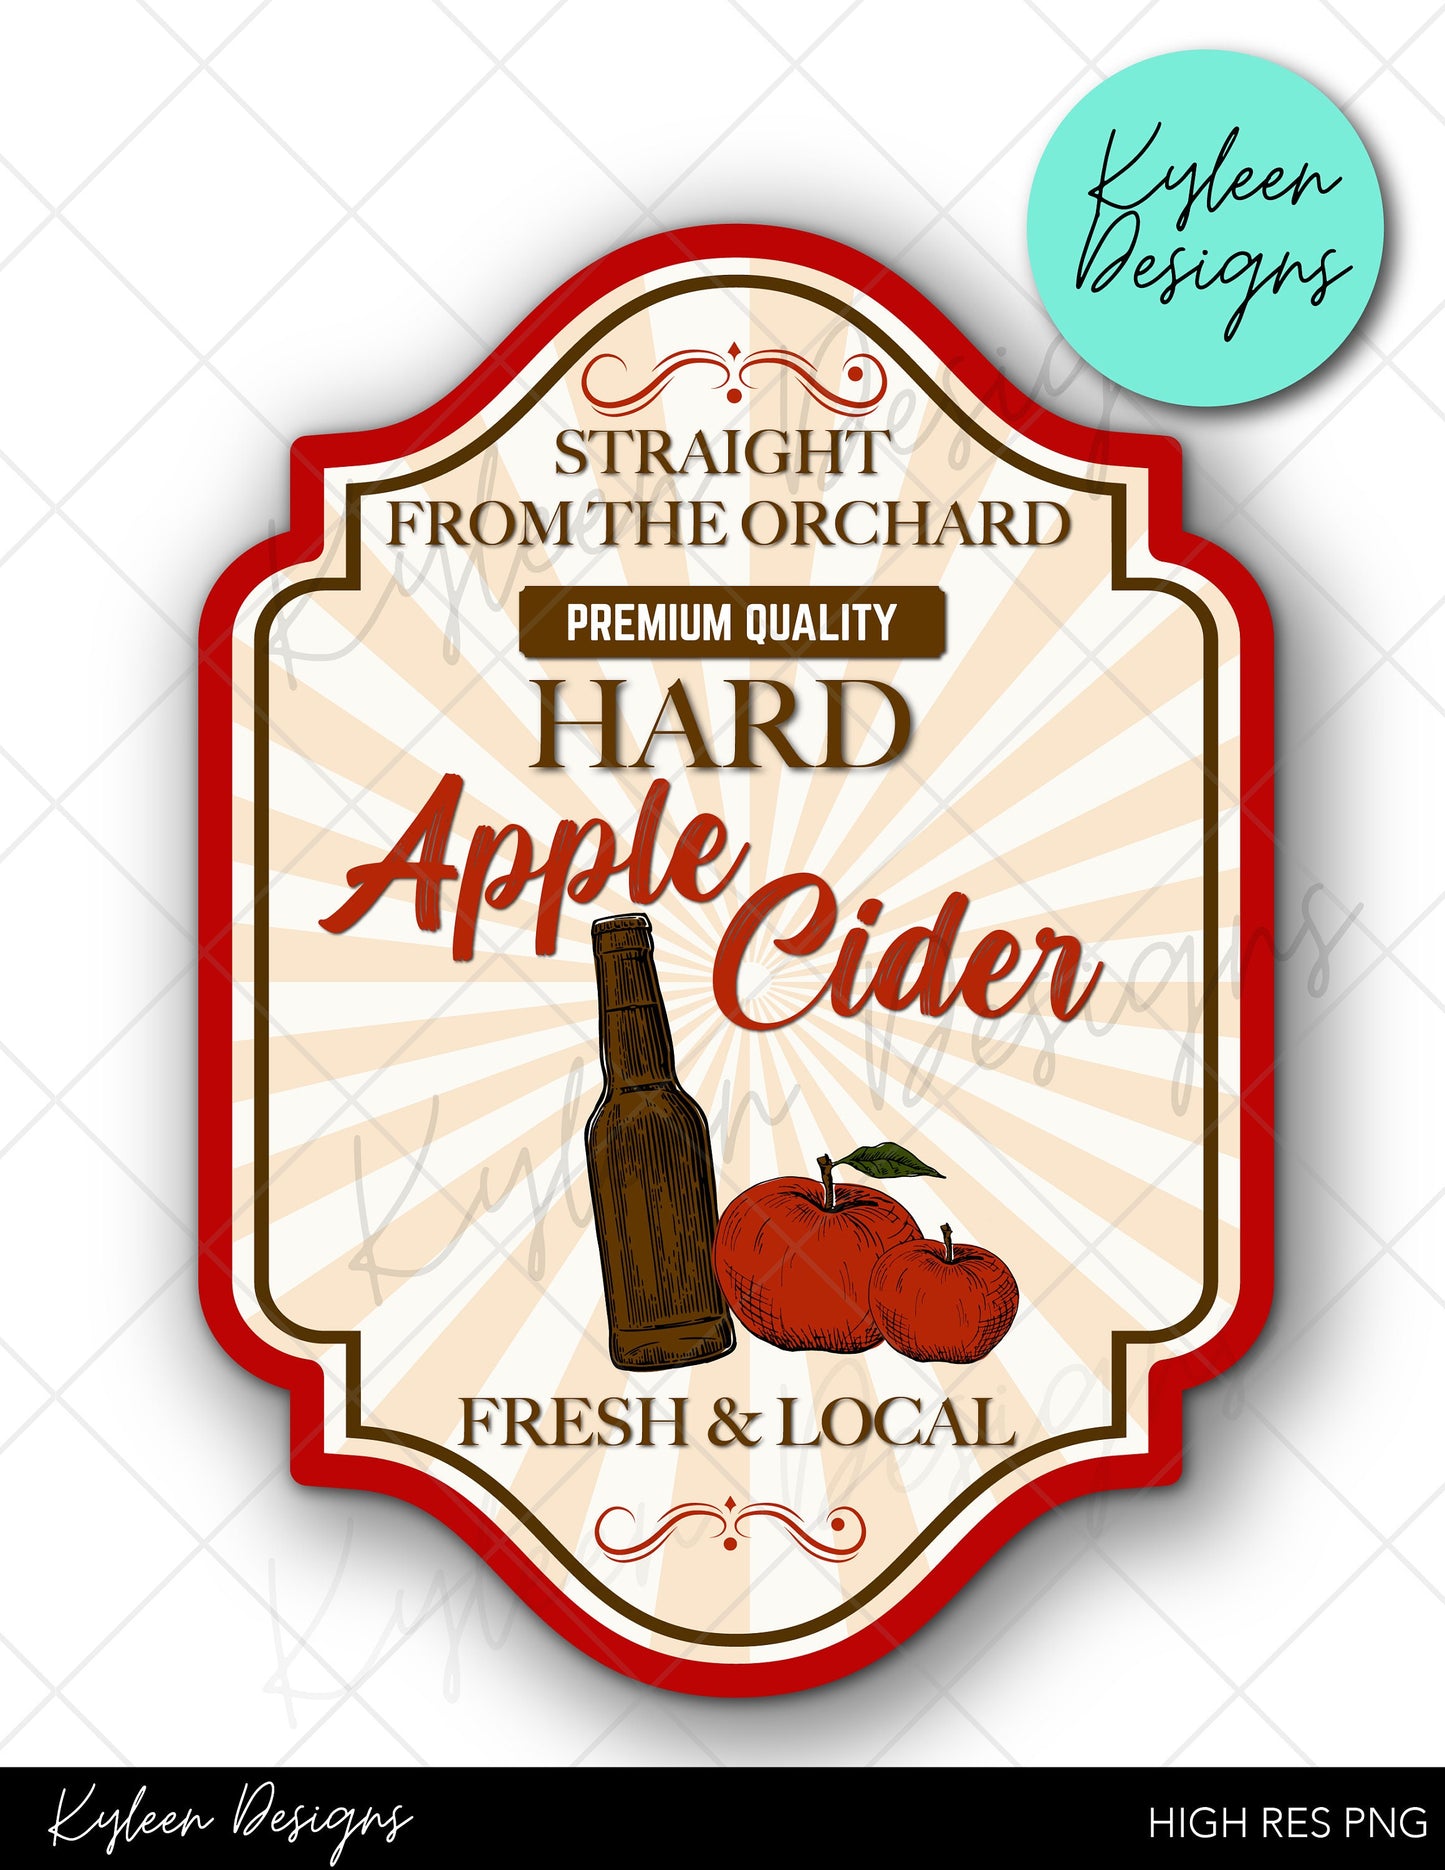 Hard apple cider label High RES PNG for coffee/beer glass